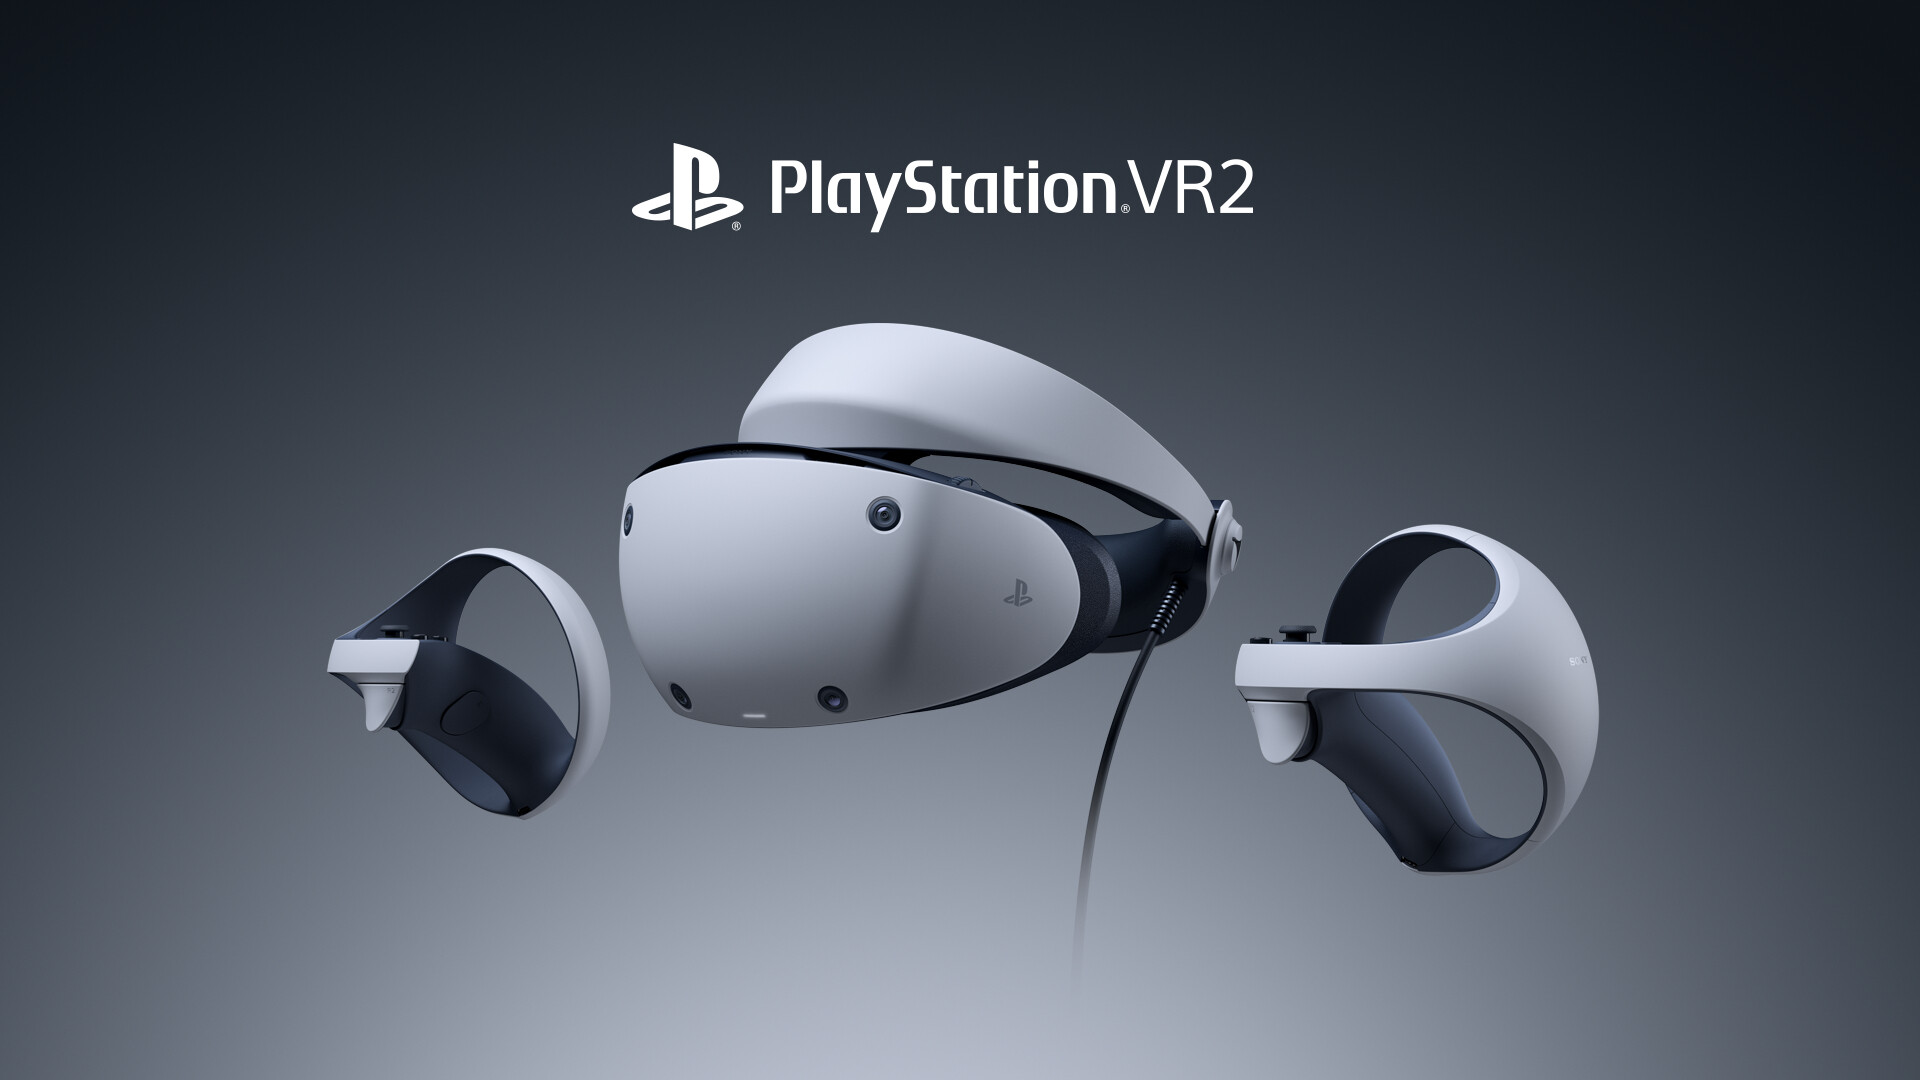 PlayStation VR2 Launches Globally With Dozens of Stunning Virtual